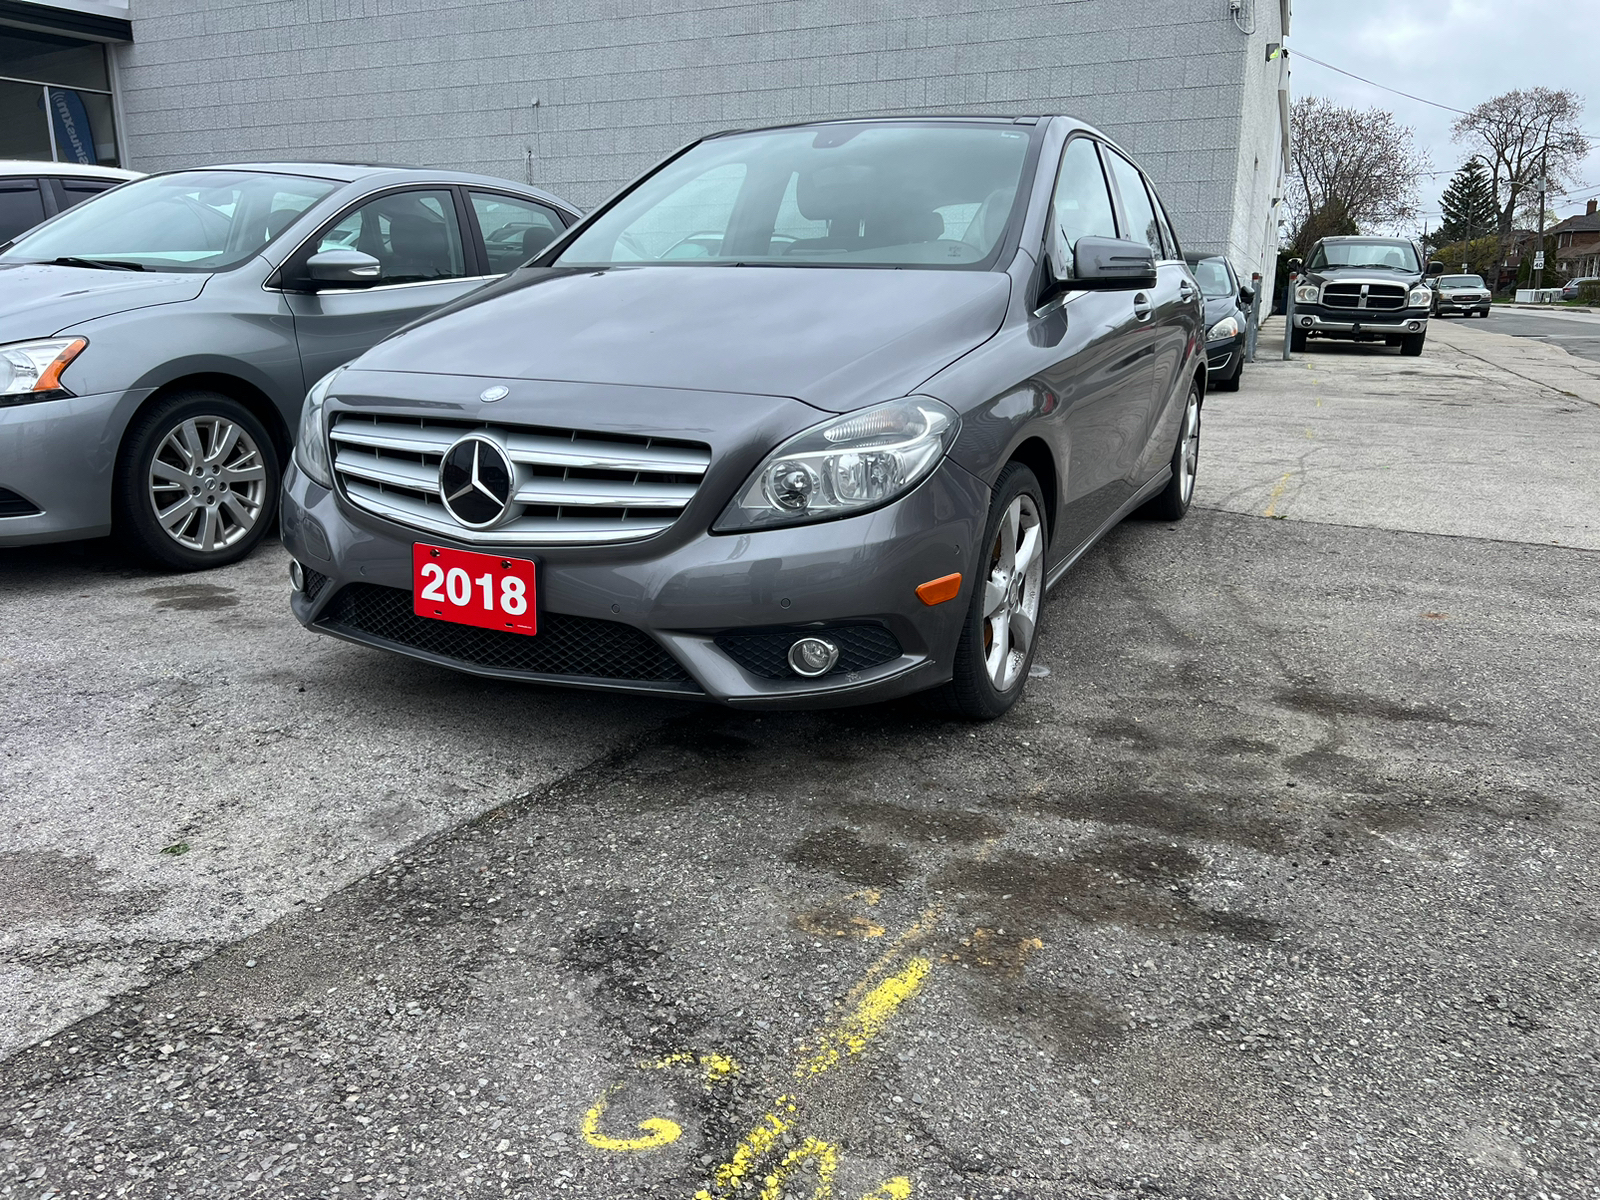 2014 Mercedes-Benz B250 B250 NOT CERTIFIED and is not drivable until certi